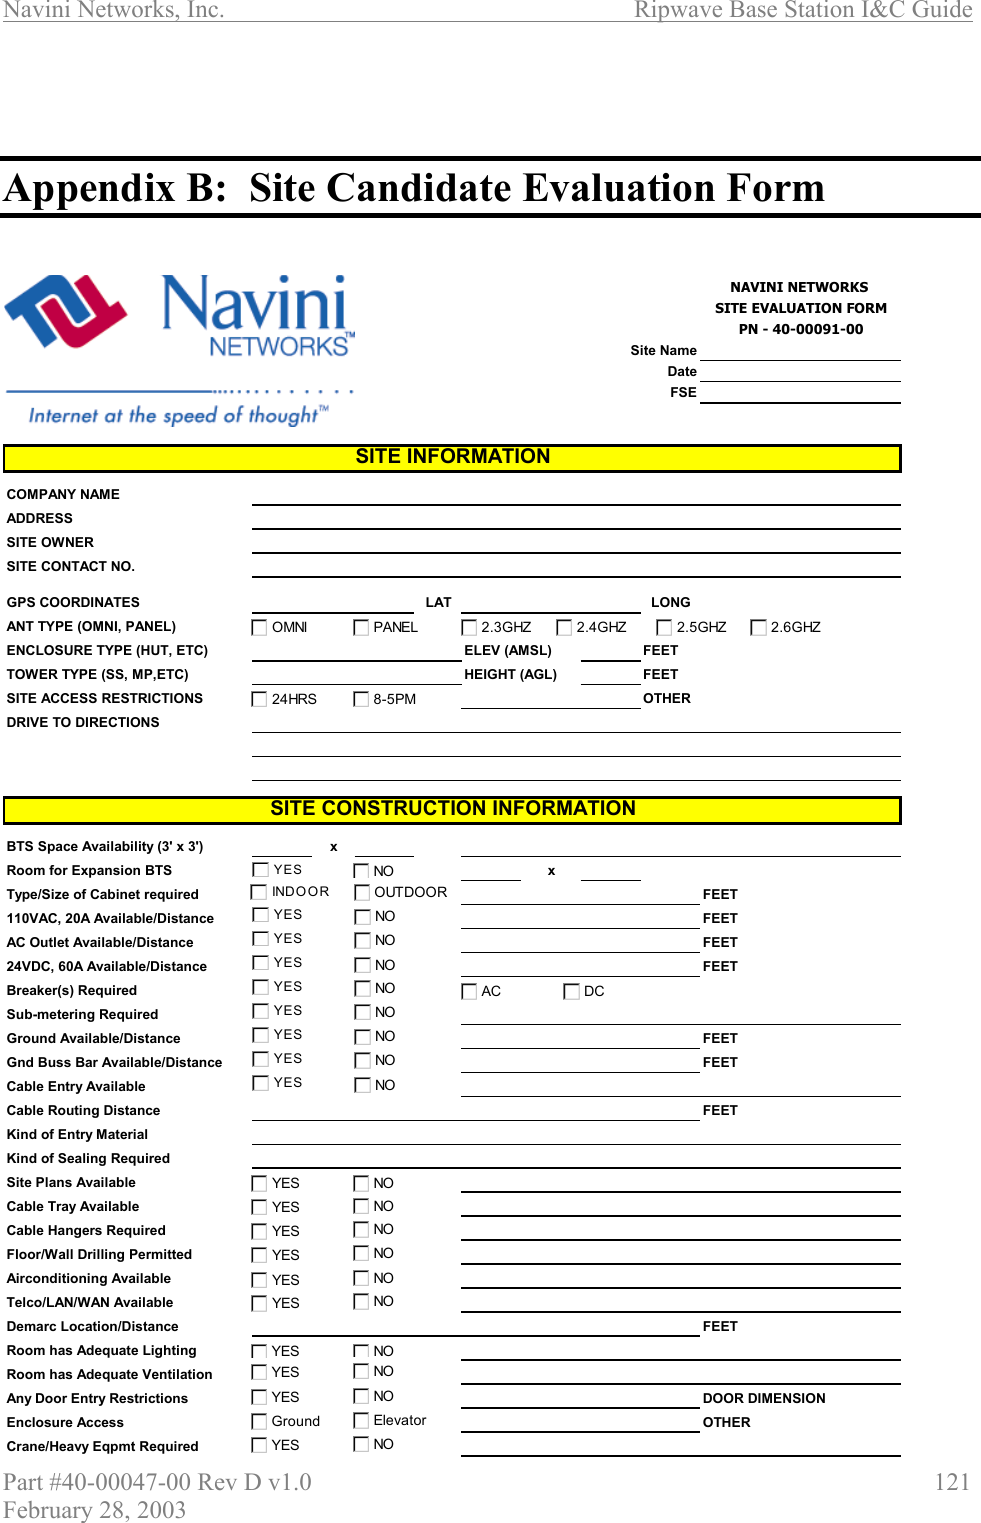 Navini Networks, Inc.                          Ripwave Base Station I&amp;C Guide Part #40-00047-00 Rev D v1.0                     121 February 28, 2003    Appendix B:  Site Candidate Evaluation Form   NAVINI NETWORKS SITE EVALUATION FORMPN - 40-00091-00Site NameDateFSECOMPANY NAMEADDRESSSITE OWNERSITE CONTACT NO.GPS COORDINATES LAT LONGANT TYPE (OMNI, PANEL)ENCLOSURE TYPE (HUT, ETC) ELEV (AMSL) FEETTOWER TYPE (SS, MP,ETC) HEIGHT (AGL) FEETSITE ACCESS RESTRICTIONS OTHERDRIVE TO DIRECTIONSBTS Space Availability (3&apos; x 3&apos;) xRoom for Expansion BTS xType/Size of Cabinet required FEET110VAC, 20A Available/Distance FEETAC Outlet Available/Distance FEET24VDC, 60A Available/Distance FEETBreaker(s) RequiredSub-metering RequiredGround Available/Distance FEETGnd Buss Bar Available/Distance FEETCable Entry AvailableCable Routing Distance FEETKind of Entry MaterialKind of Sealing RequiredSite Plans AvailableCable Tray AvailableCable Hangers RequiredFloor/Wall Drilling PermittedAirconditioning AvailableTelco/LAN/WAN AvailableDemarc Location/Distance FEETRoom has Adequate LightingRoom has Adequate VentilationAny Door Entry Restrictions DOOR DIMENSIONEnclosure Access OTHERCrane/Heavy Eqpmt RequiredSITE INFORMATIONSITE CONSTRUCTION INFORMATIONYES NOINDOOR OUTDOOROMNI PANEL 2.3GHZ 2.4GHZ24HRS 8-5PMYES NOYES NOYES NOYES NOYES NOYES NOYES NOYES NOYES NOGround ElevatorYES NOACDCNOYESNOYESNOYESNOYESNOYESNOYESNOYESNOYES2.5GHZ 2.6GHZ